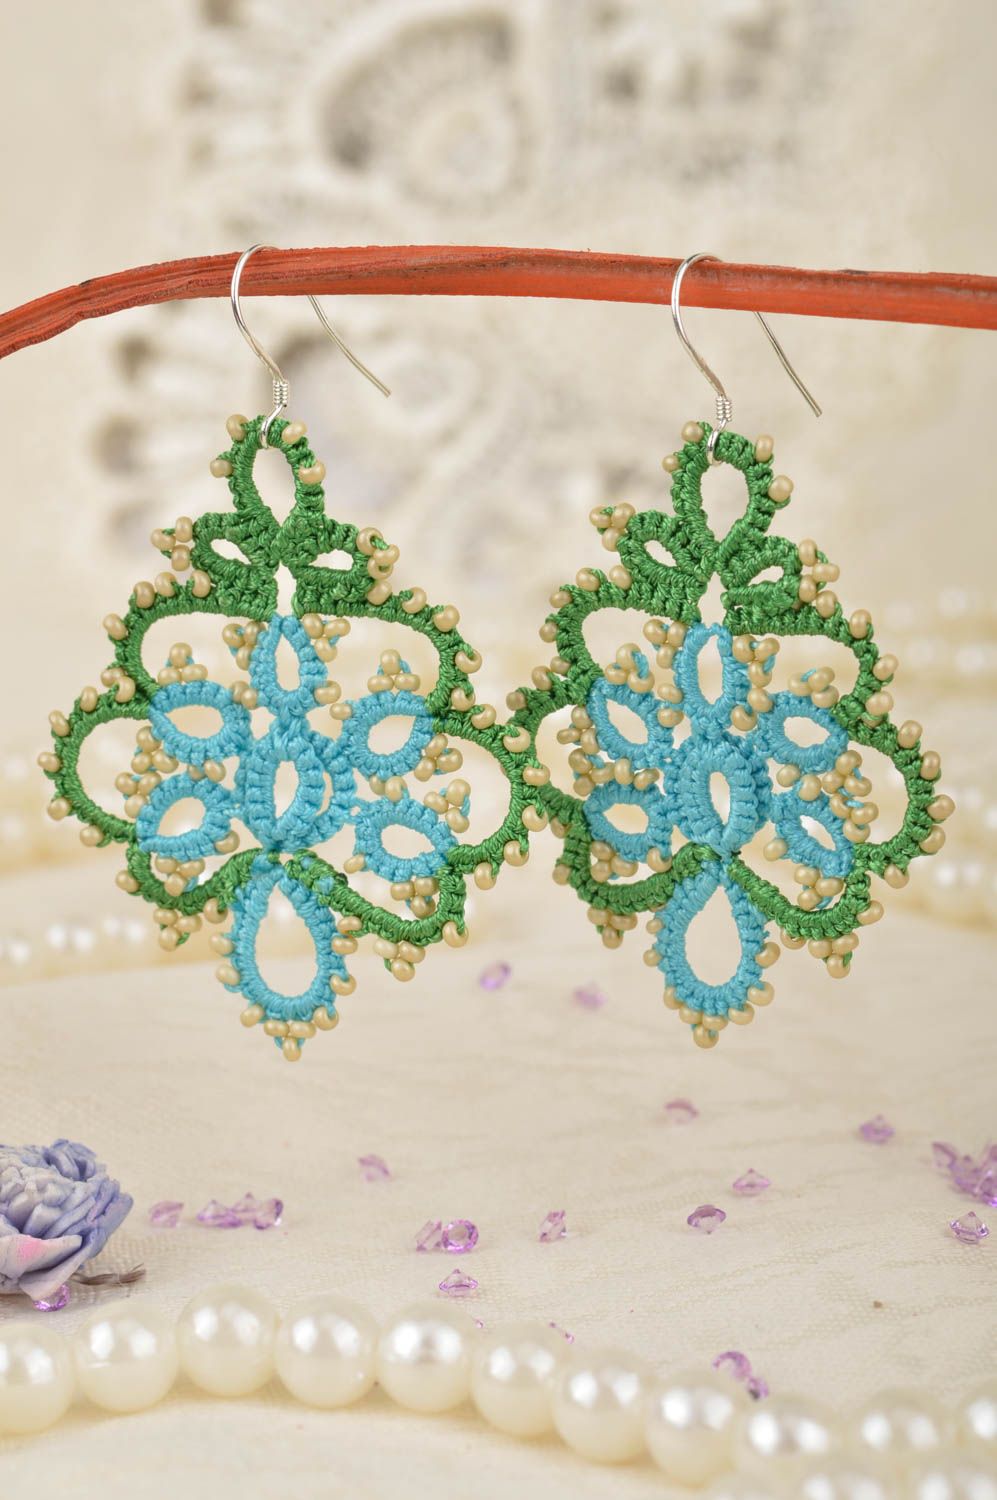 Handmade large lace drop tatted earrings woven of green and blue satin threads photo 1